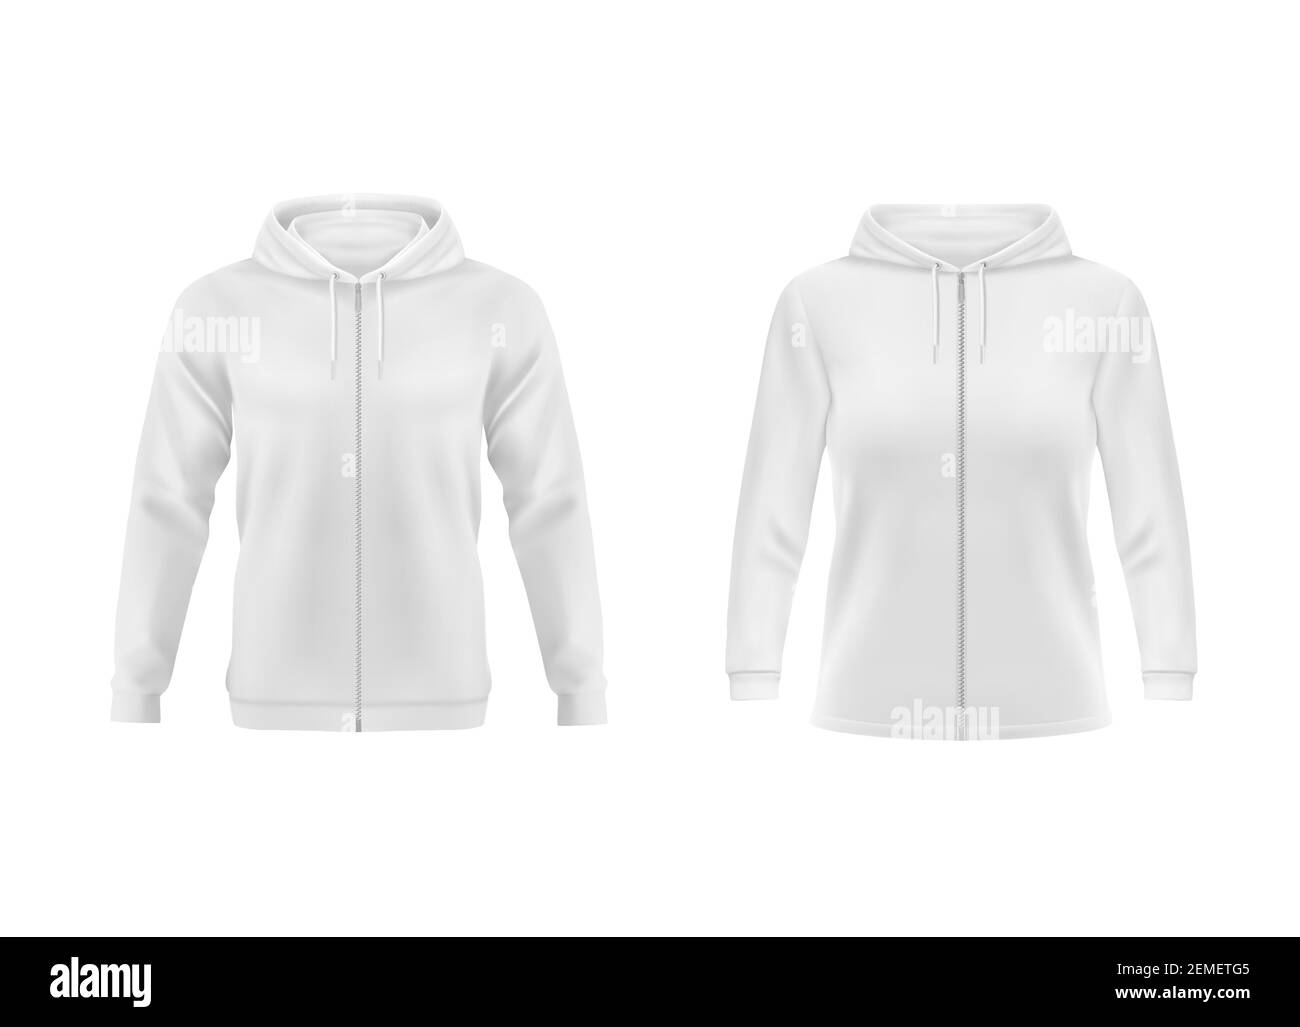 Hoodie, white sweatshirt vector mockup for men and women front view. Isolated hoody with long sleeves, zipper and drawstrings. Sport, casual or urban Stock Vector